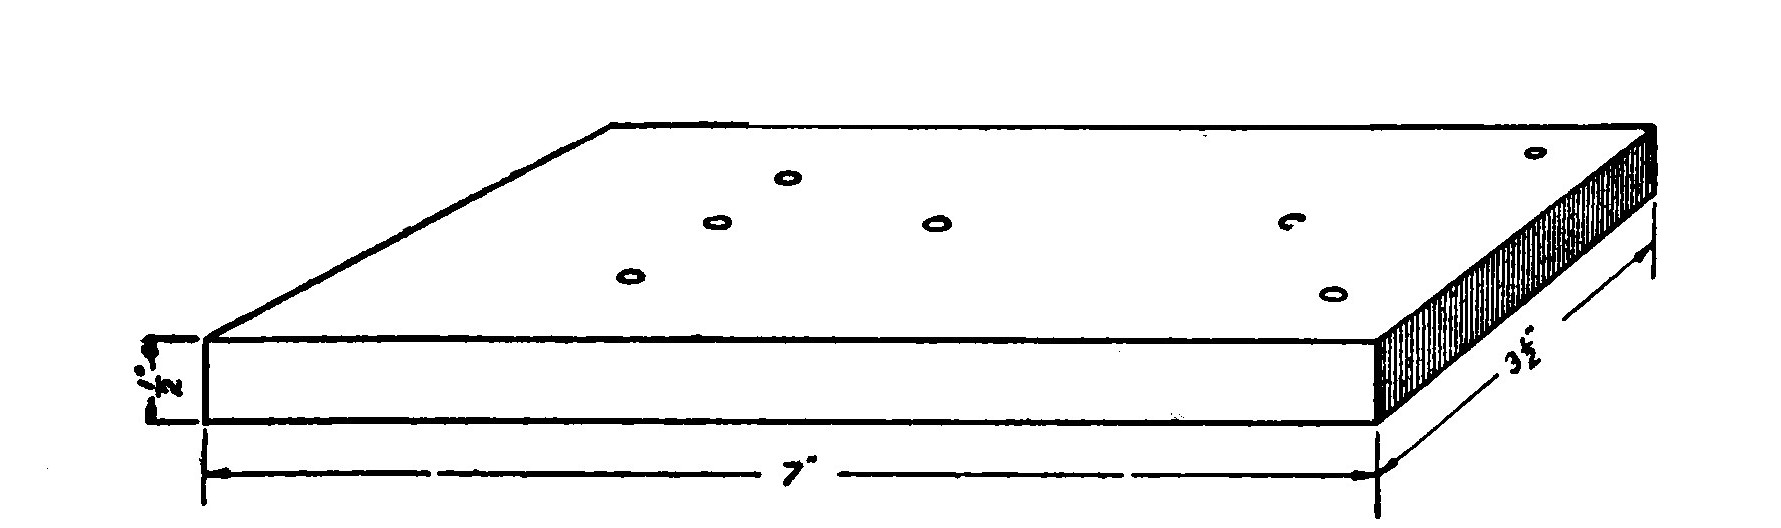 FIG. 51.—The Base.